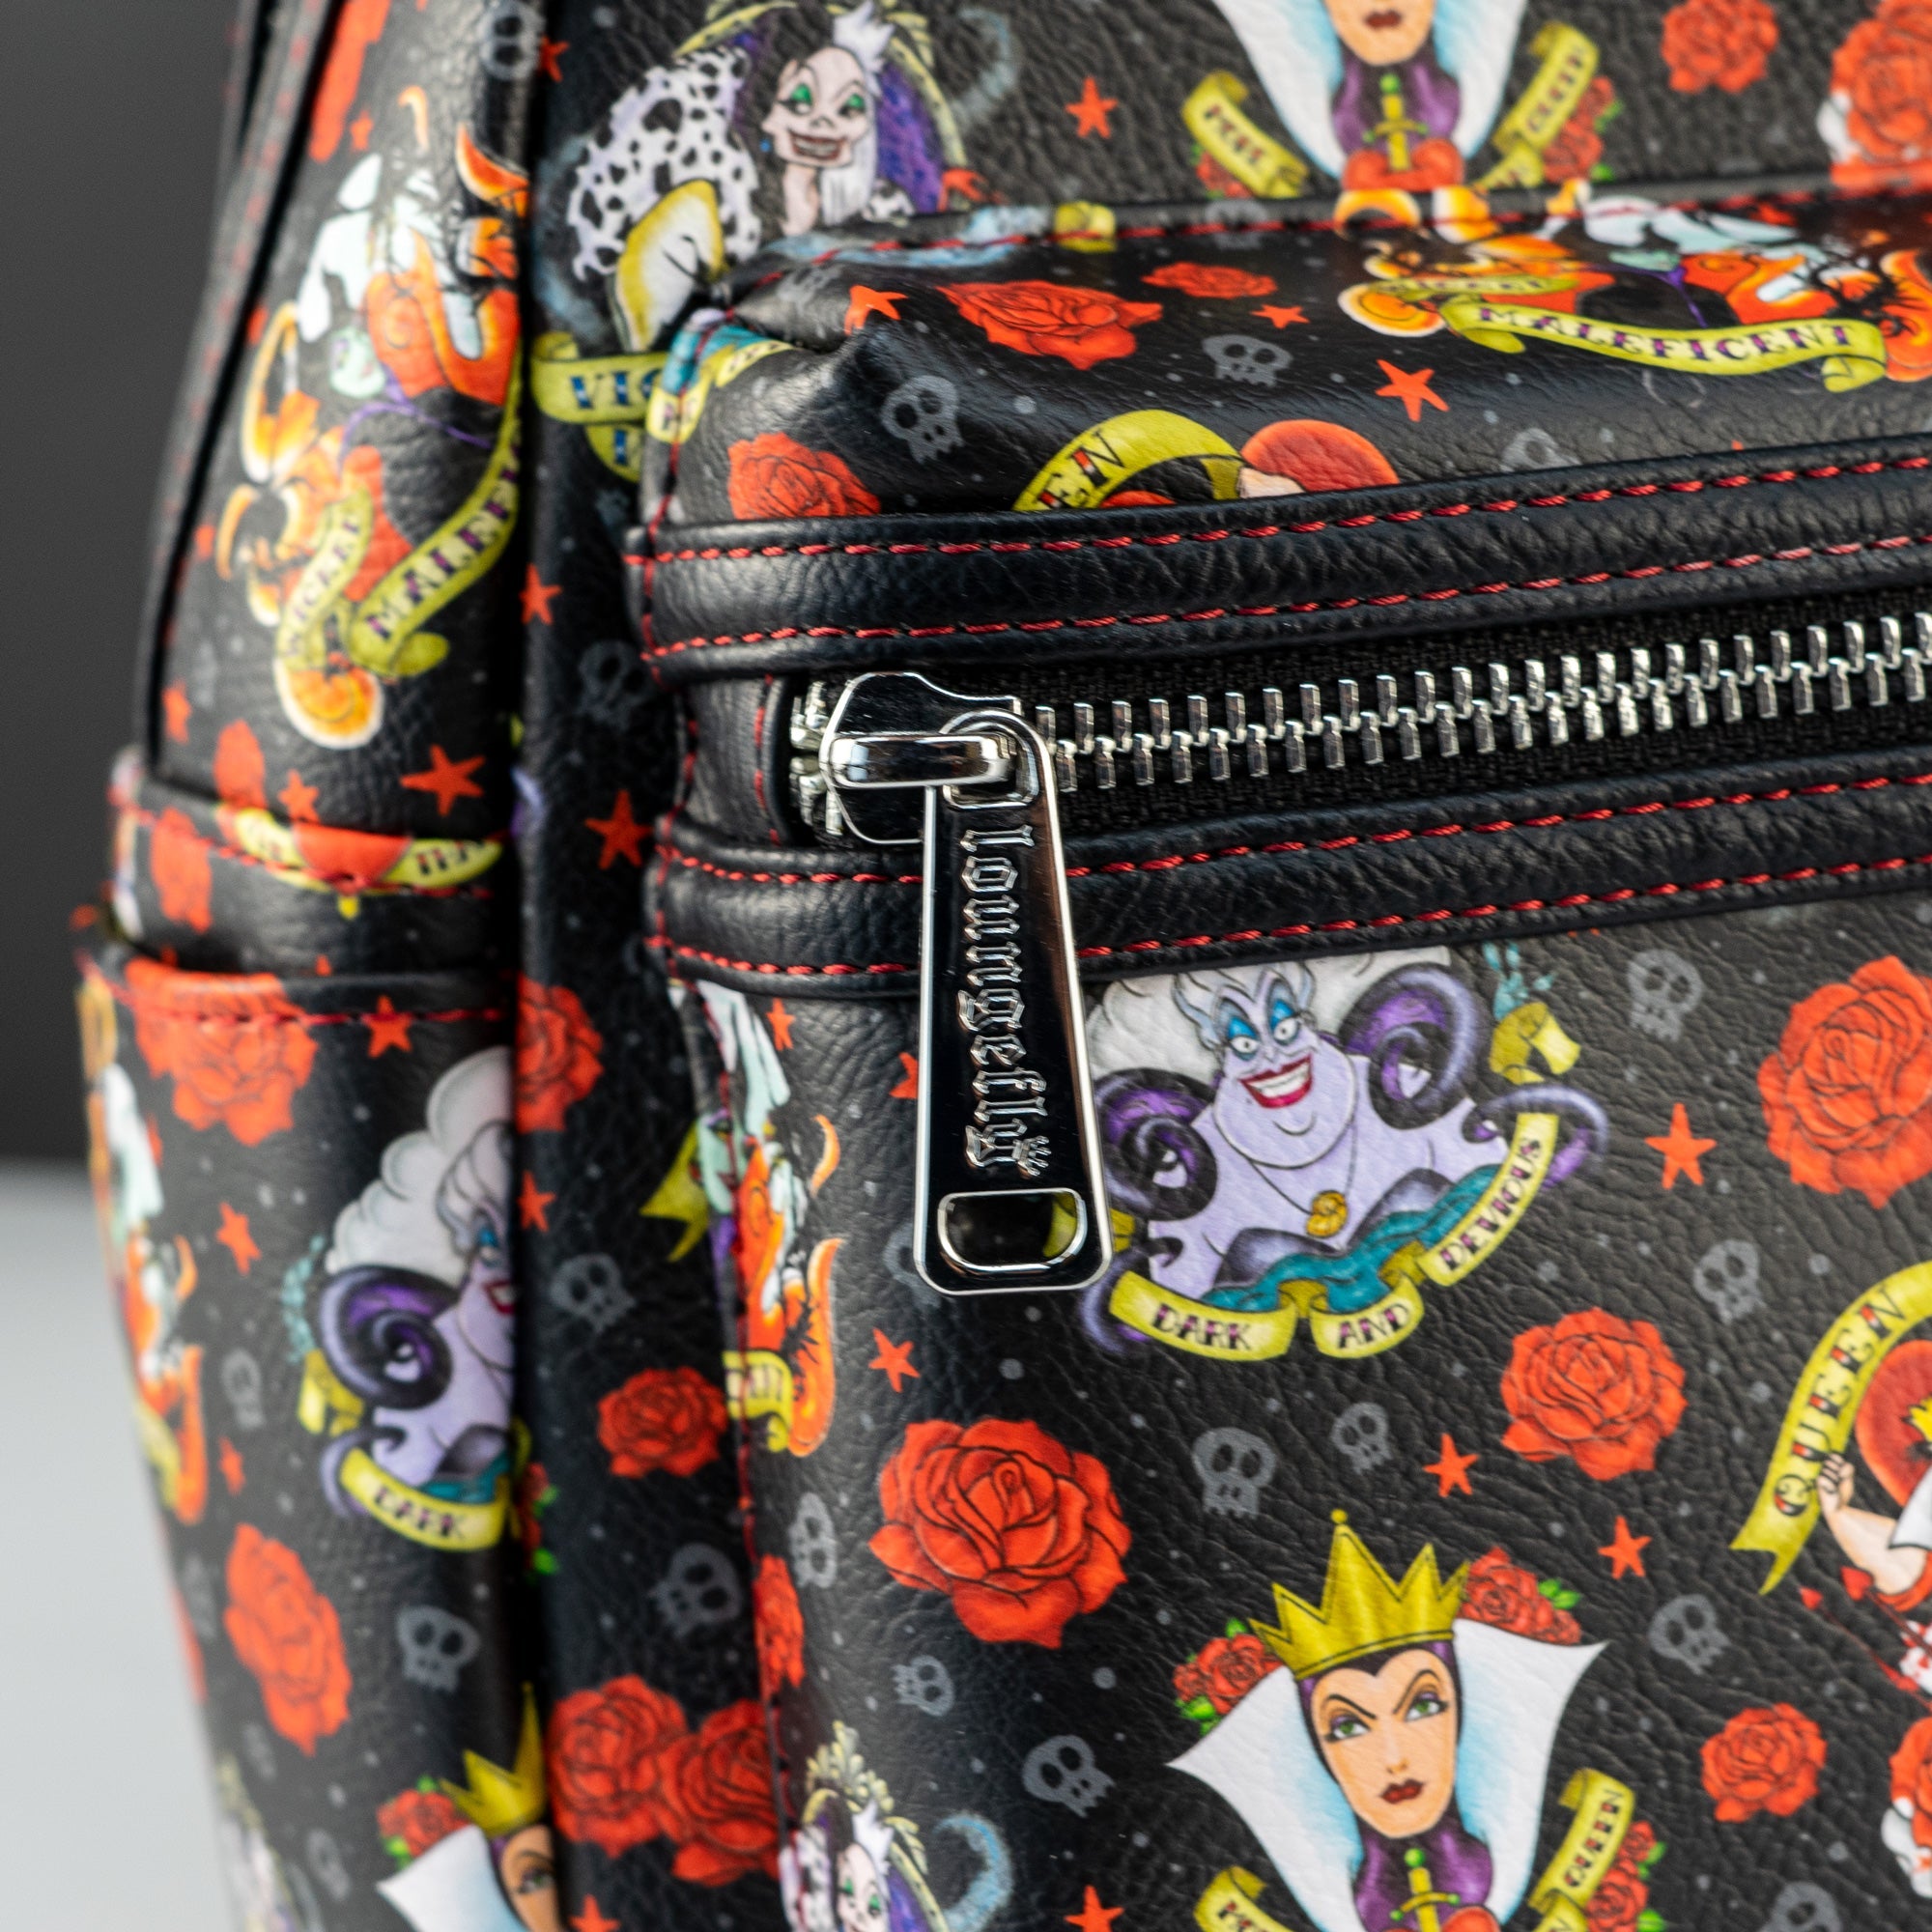 Loungefly x Disney Villains Black Tattoo All Over Print Mini Backpack - GeekCore